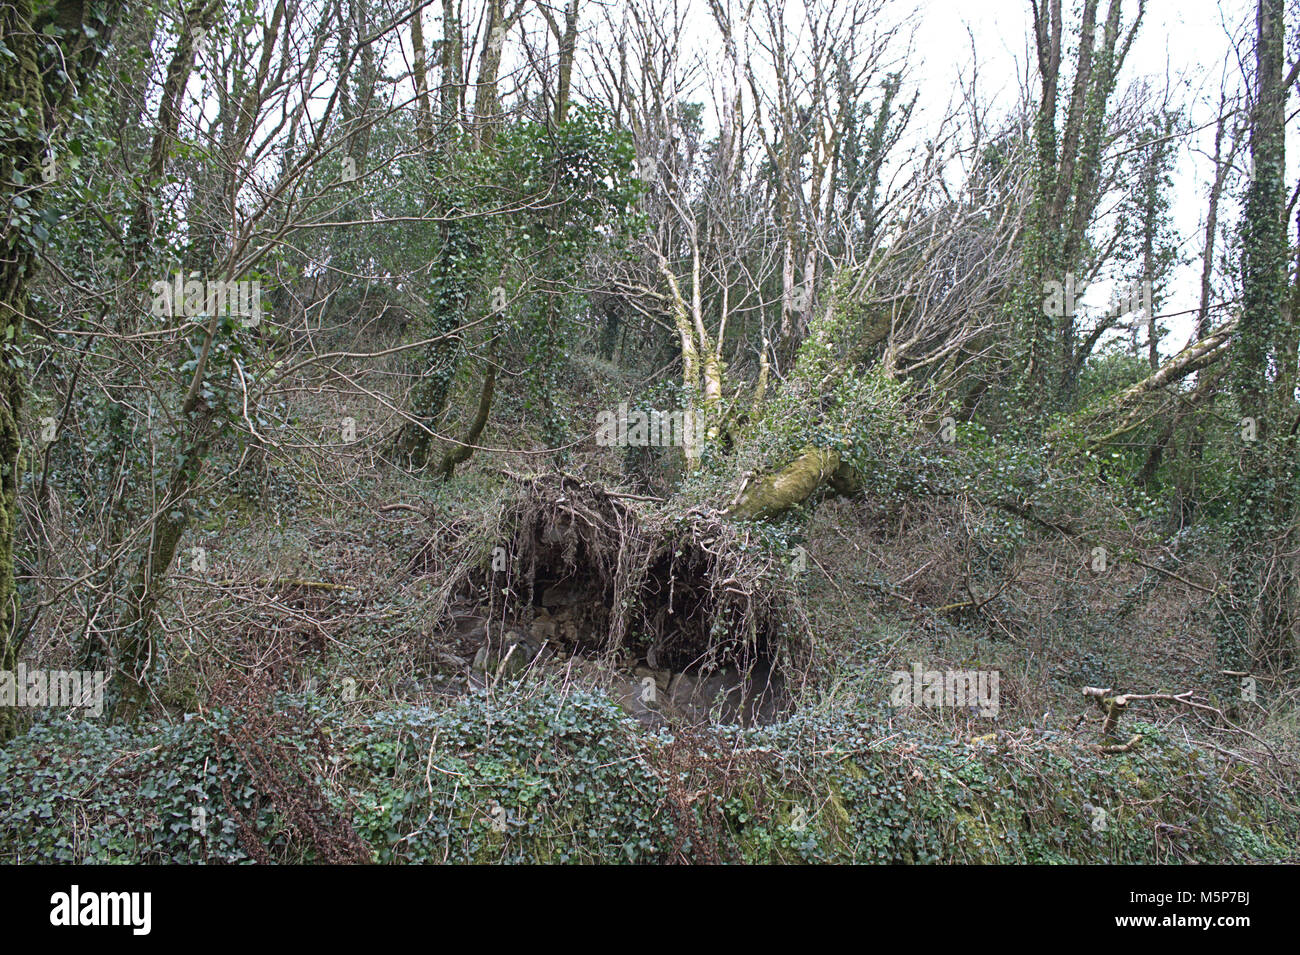 West Cork, Ireland. 25th February, 2018. Storm Ophelia's legacy can still be seen along the roads of West Cork, with damaged walls and tree's snapped like twigs still to be cleared. Credit: aphperspective/Alamy Live News Stock Photo